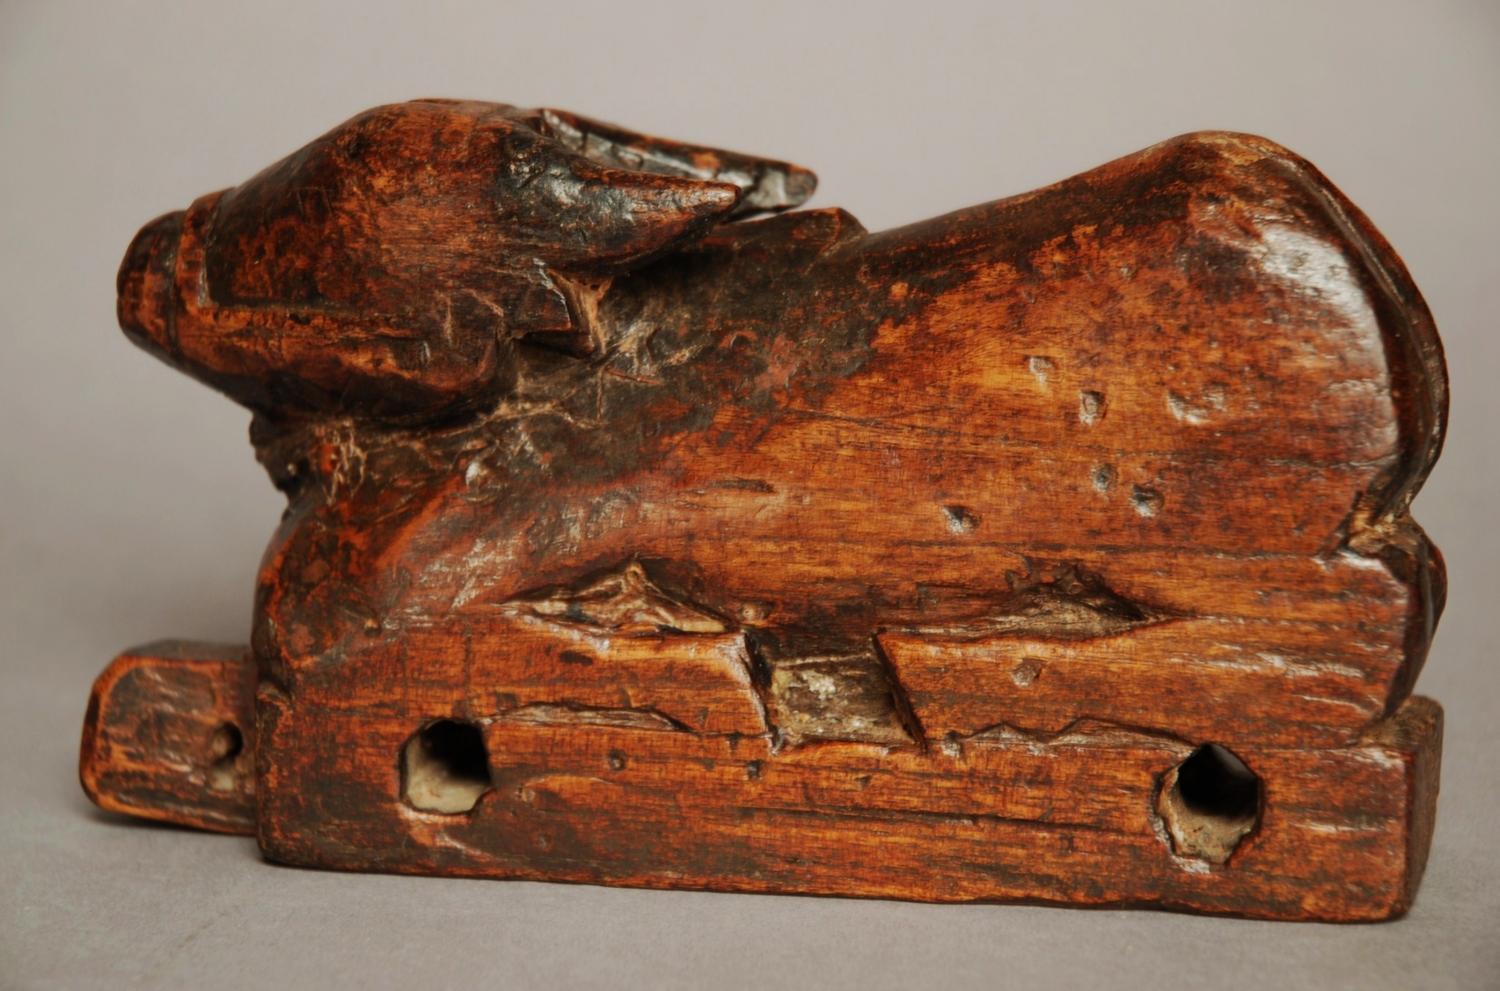 Wooden childs toy of a calf